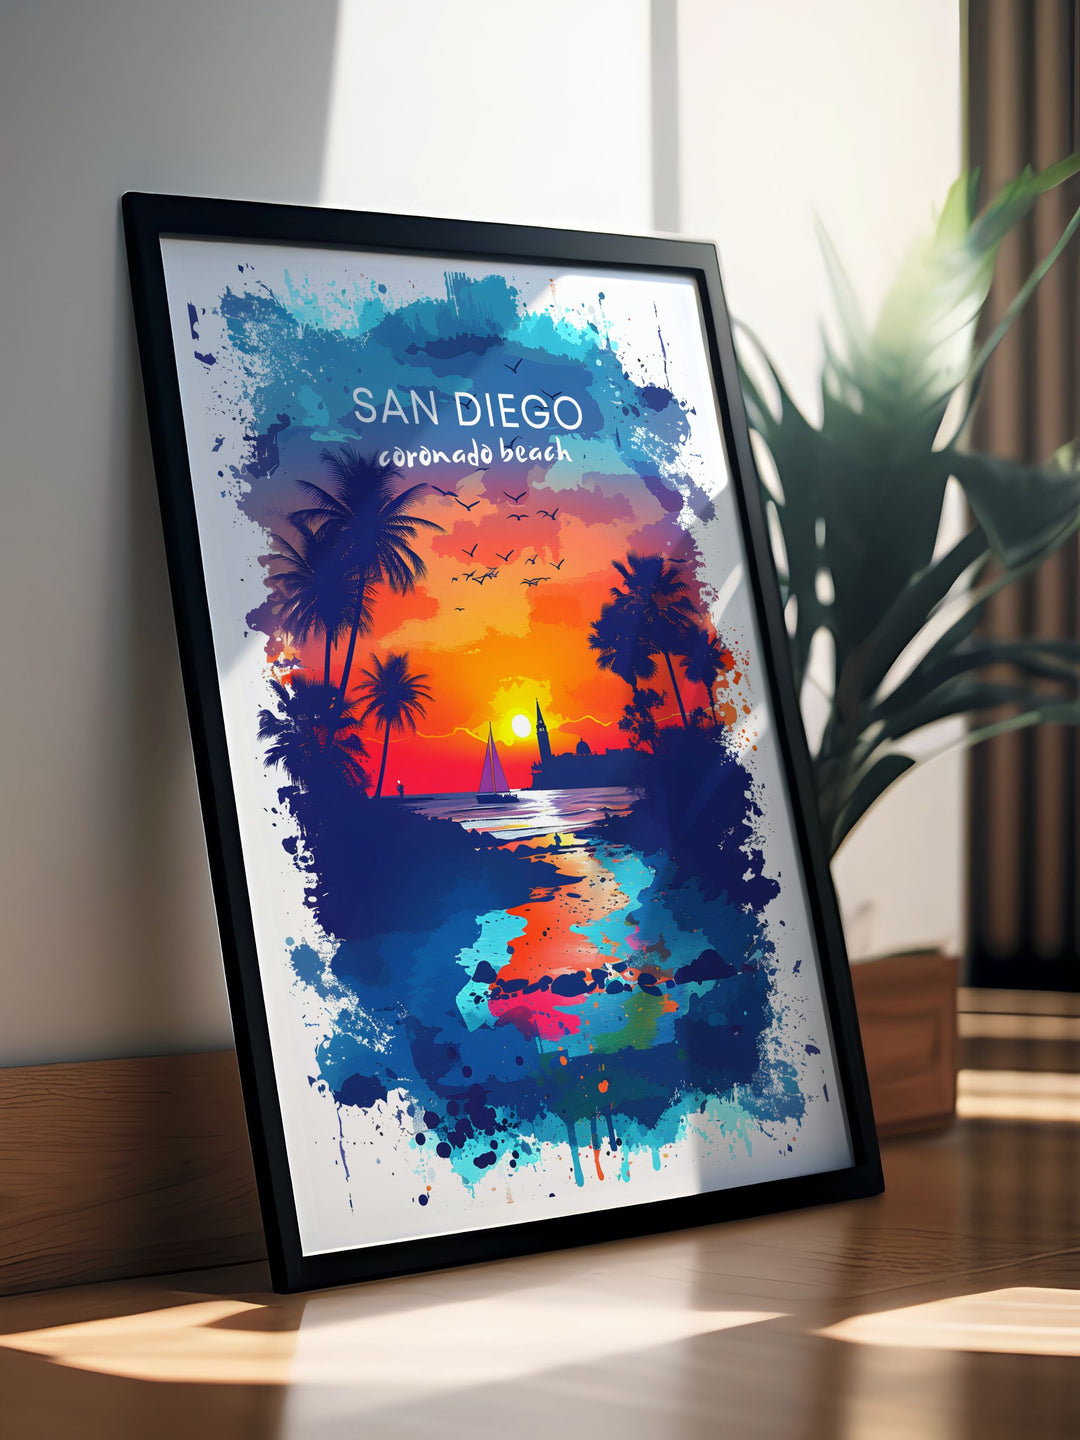 Our Vail Ski Poster and Sunset Artwork make the perfect Coronado Gift for any occasion. This beautiful piece of Colorado Decor is ideal for birthdays anniversaries or holidays offering a unique blend of adventure and natural beauty.